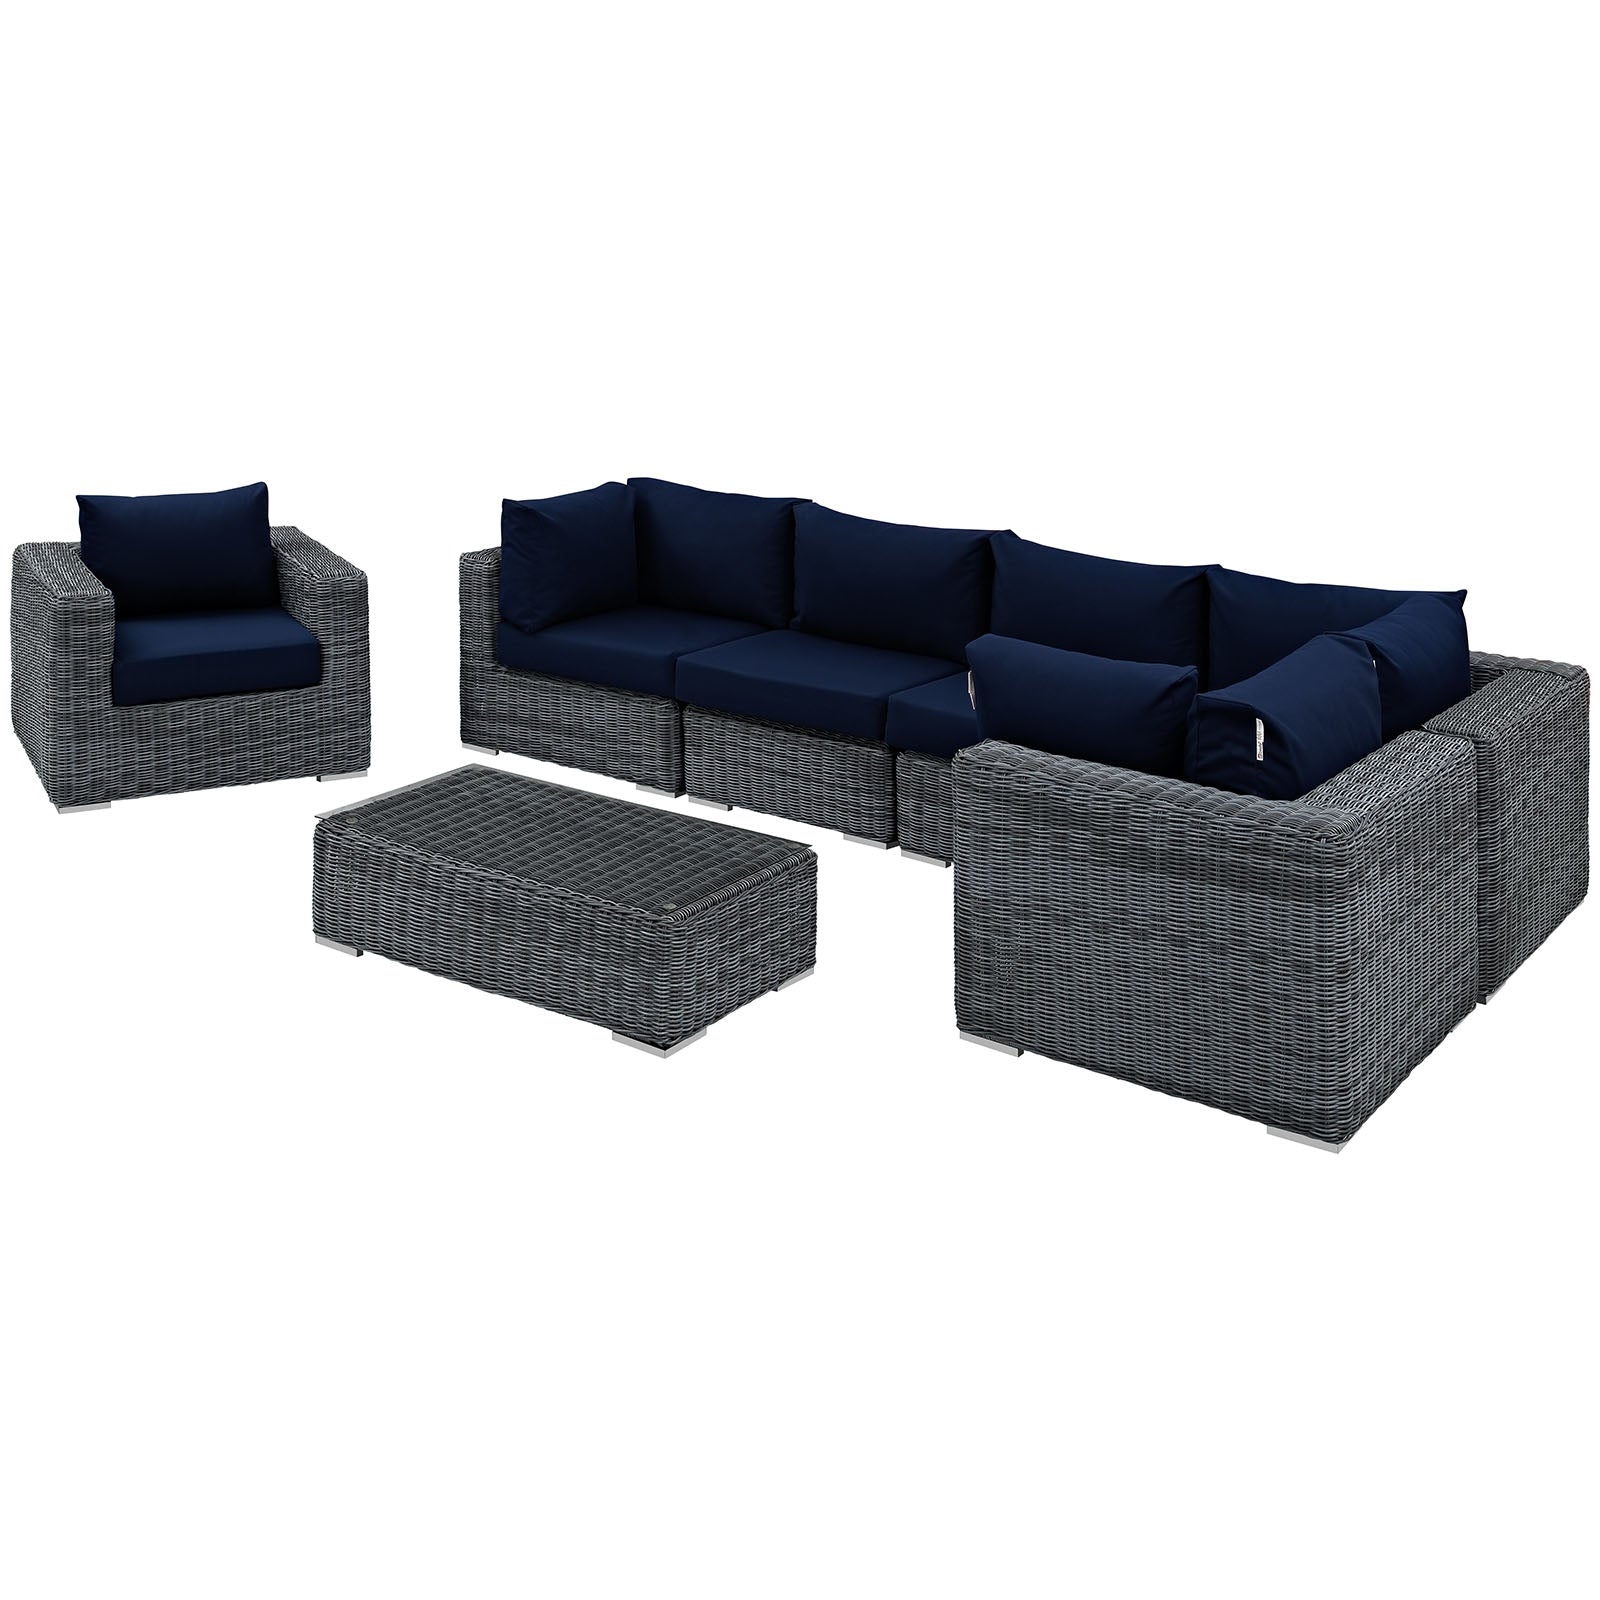 Modway Outdoor Conversation Sets - Summon 7 Piece Outdoor Patio Sectional Set Canvas Navy